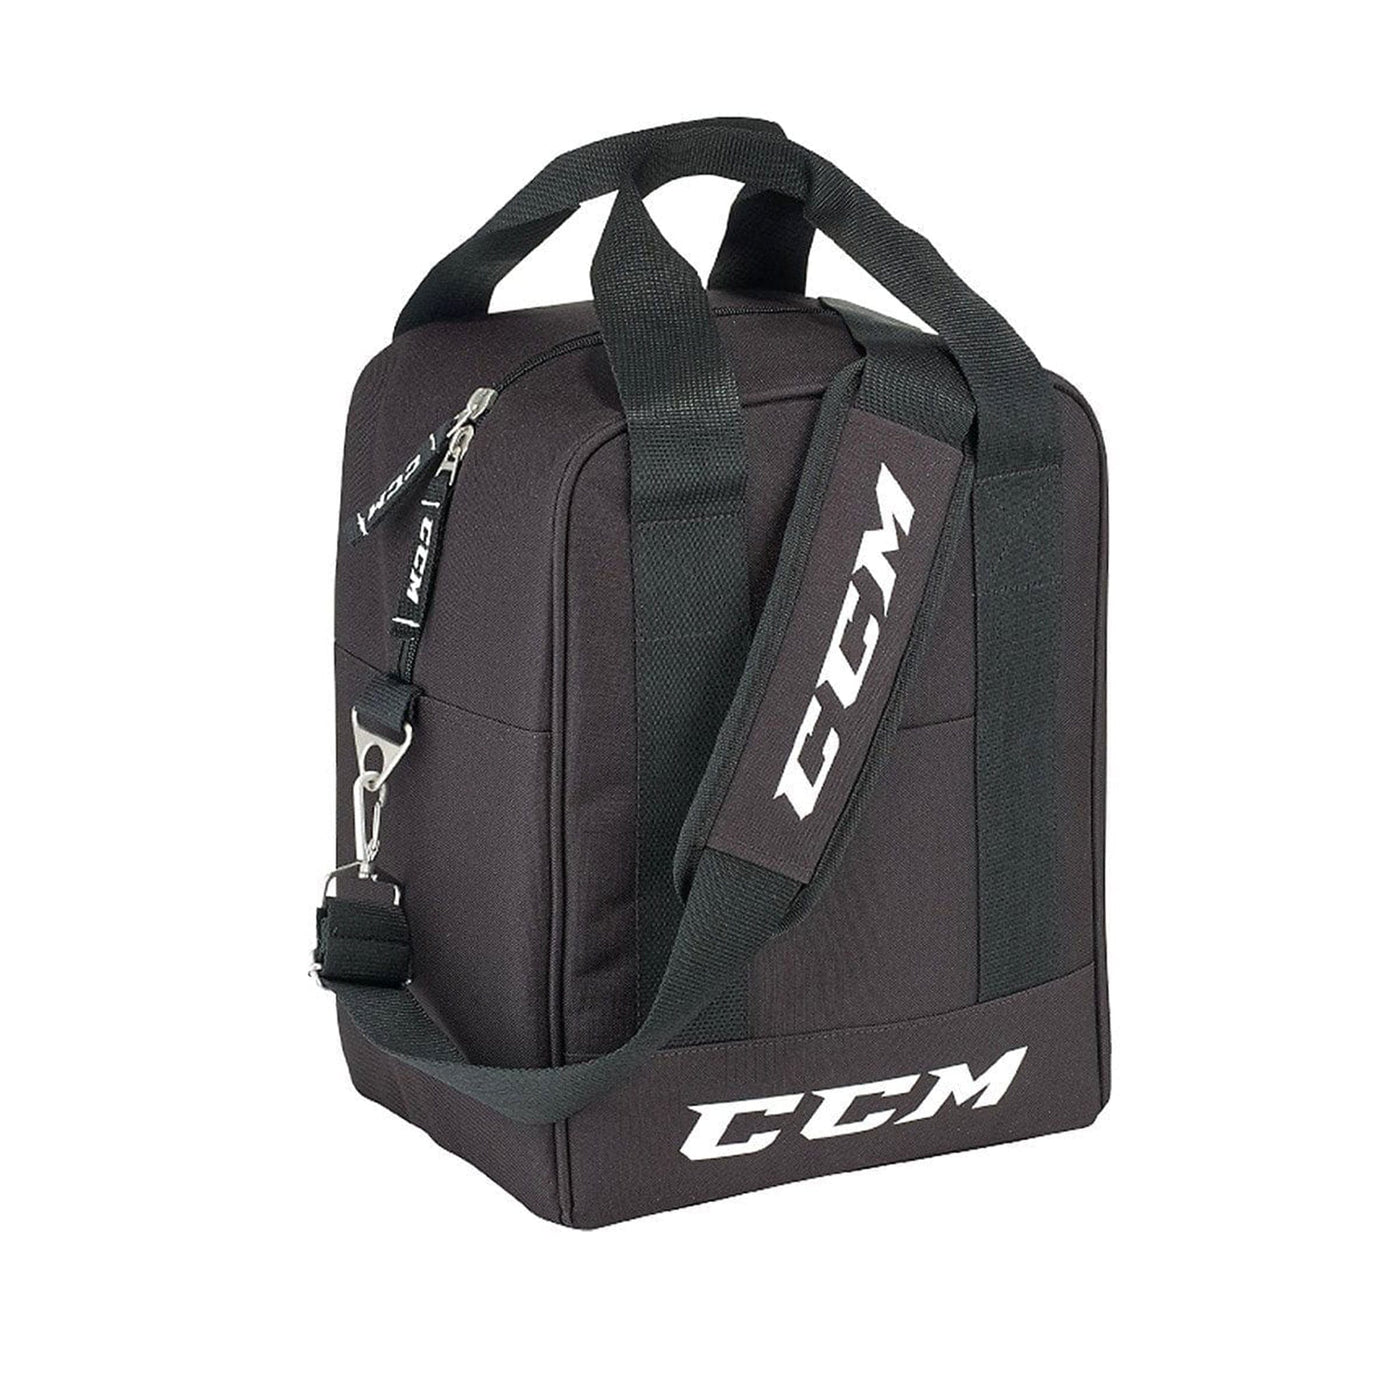 CCM Deluxe Puck Bag (2021) - The Hockey Shop Source For Sports